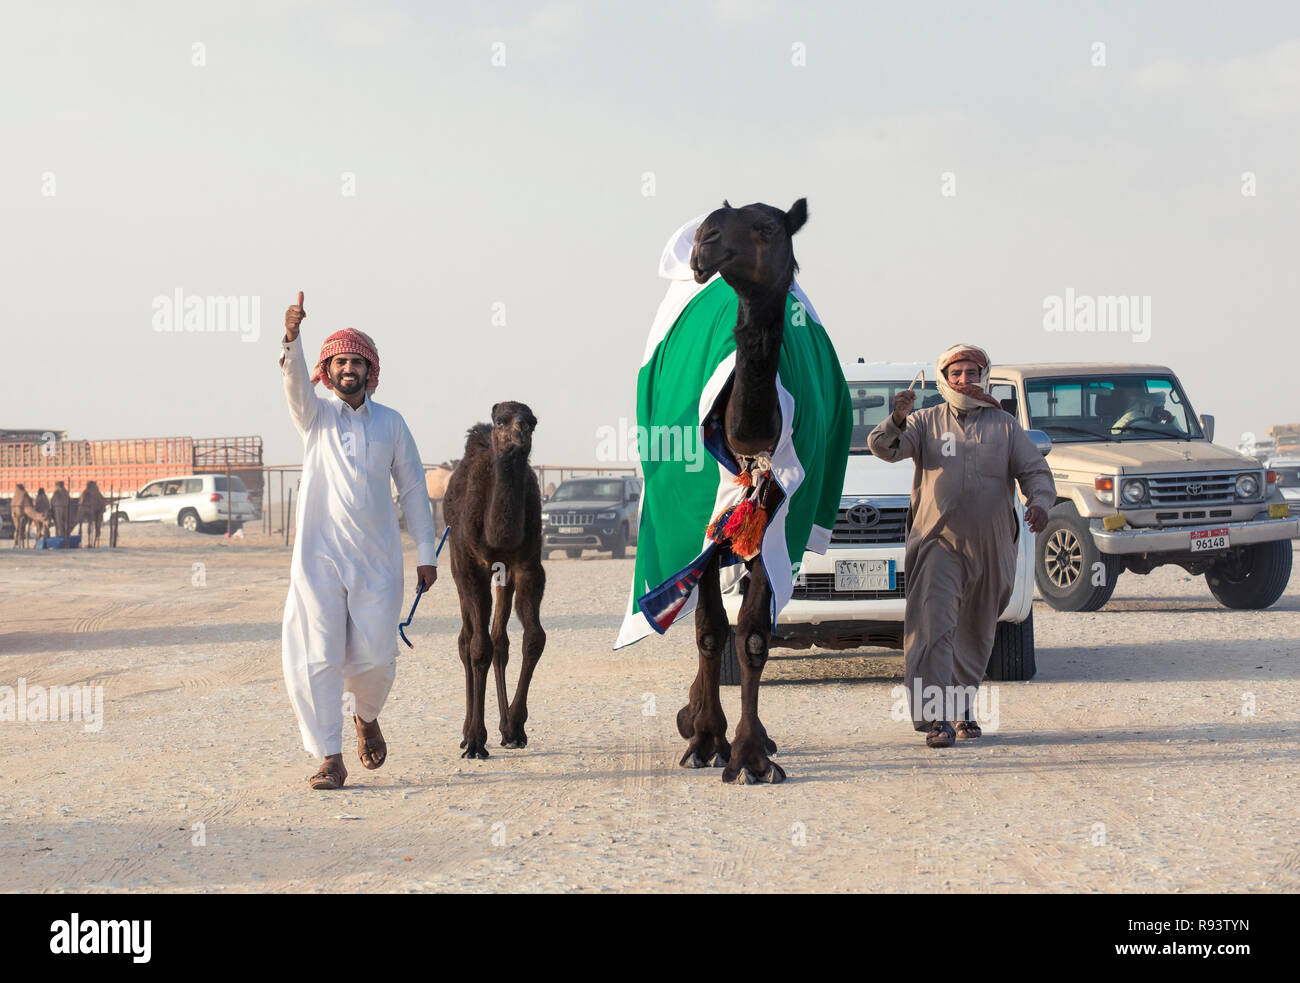 Madinat Zayed, United Arab Emirates, December 15th, 2017: arab man with his camel at The Million Street where camels get bought and sold Stock Photo